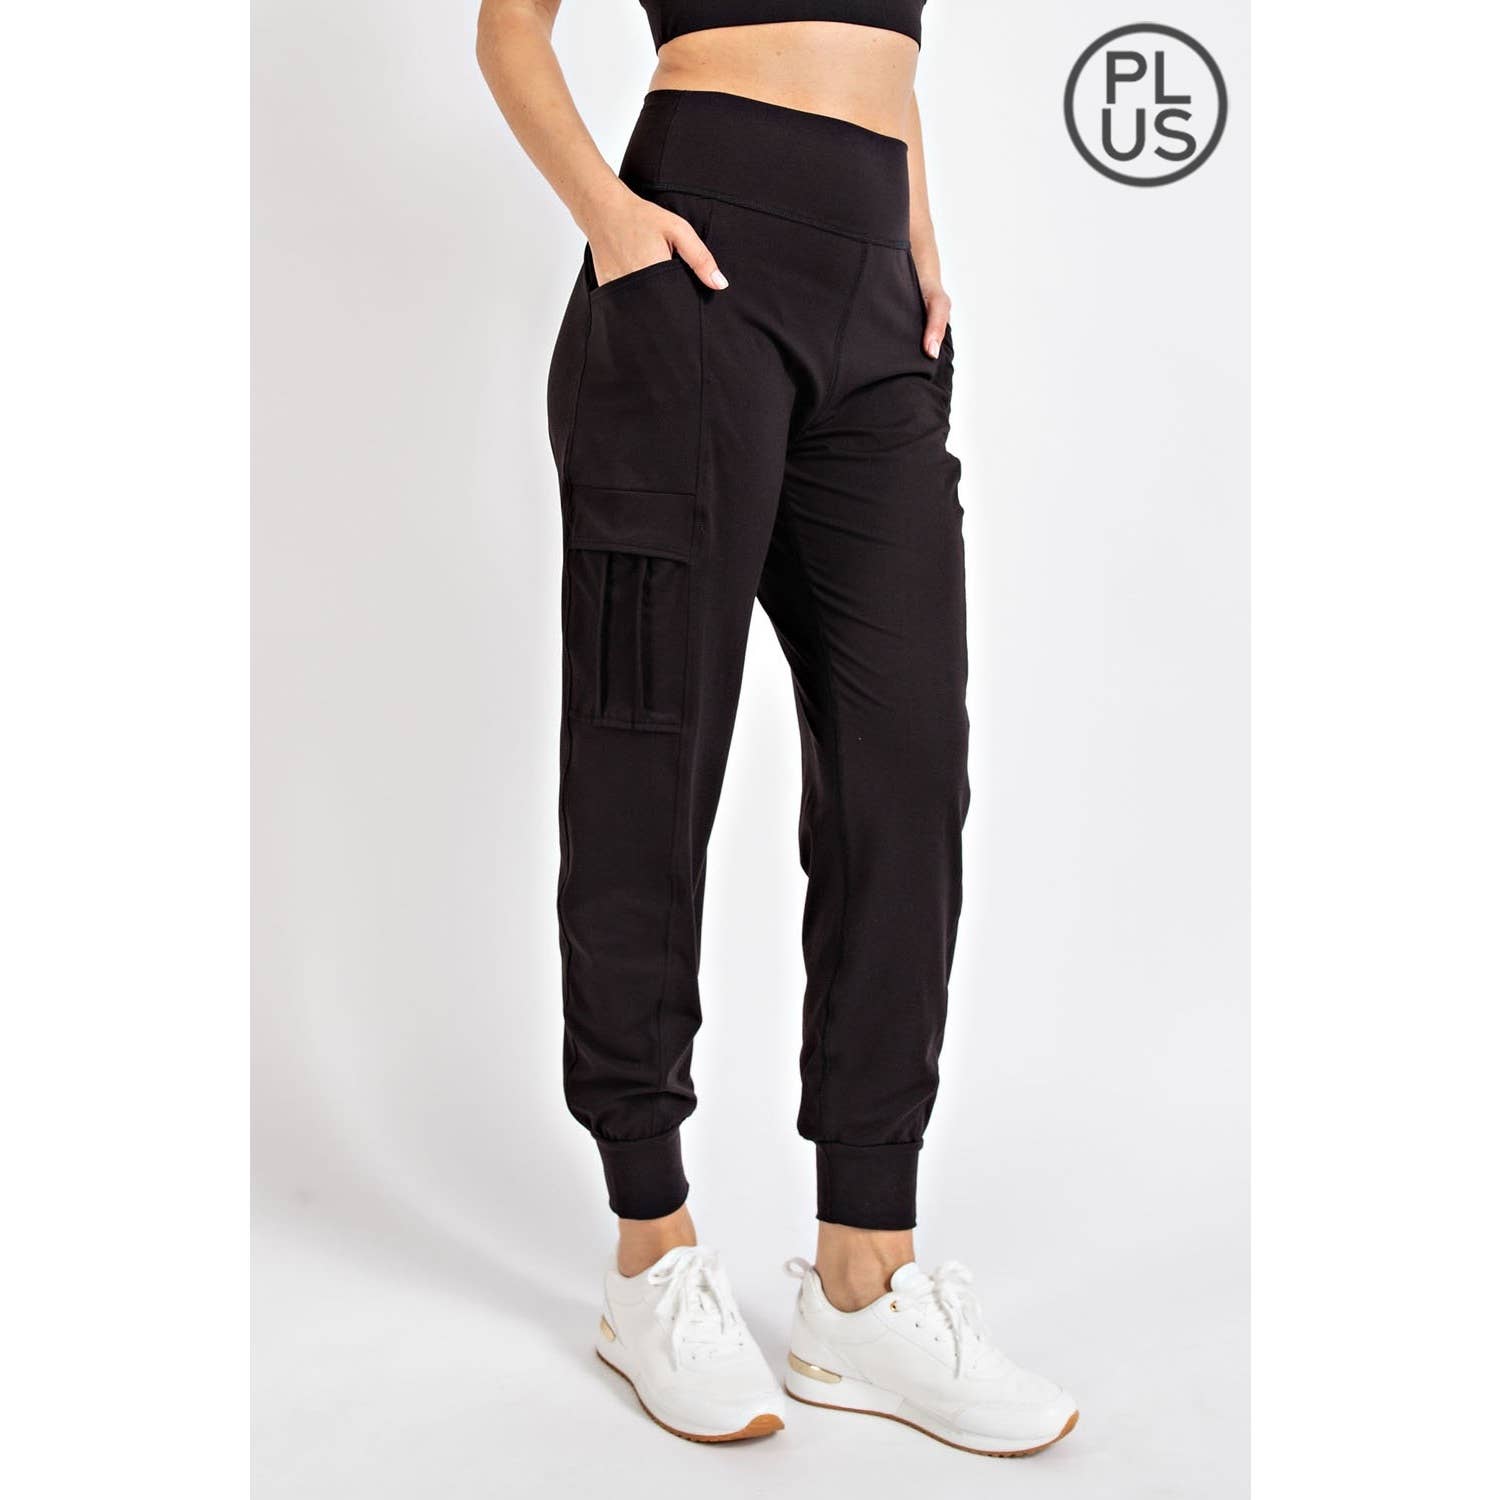 PLUS SIZE BUTTER JOGGER WITH SIDE POCKETS: Black